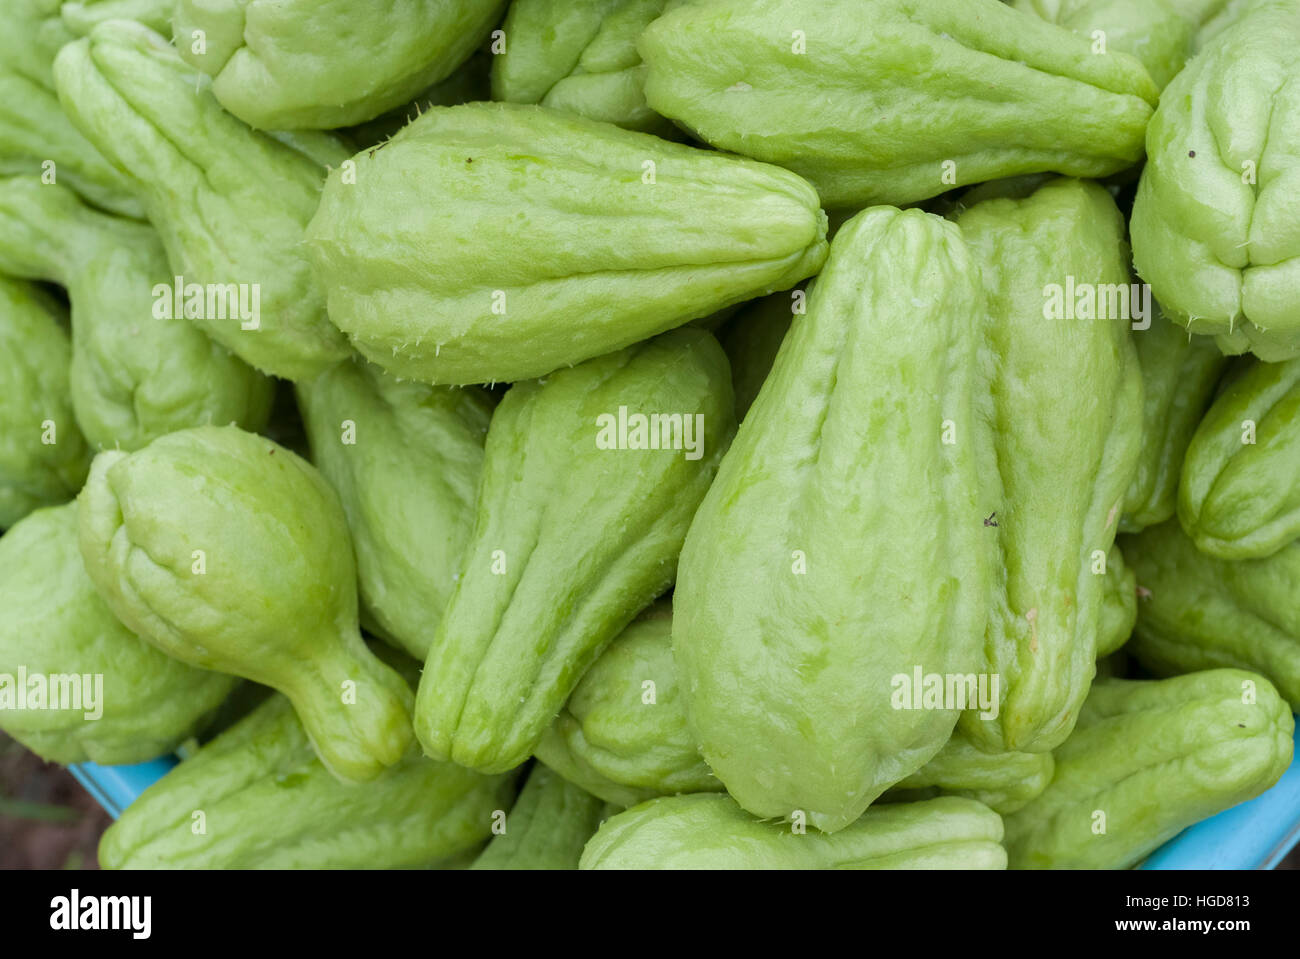 Pile of green chayote squash freshly picked from the trees Stock Photo